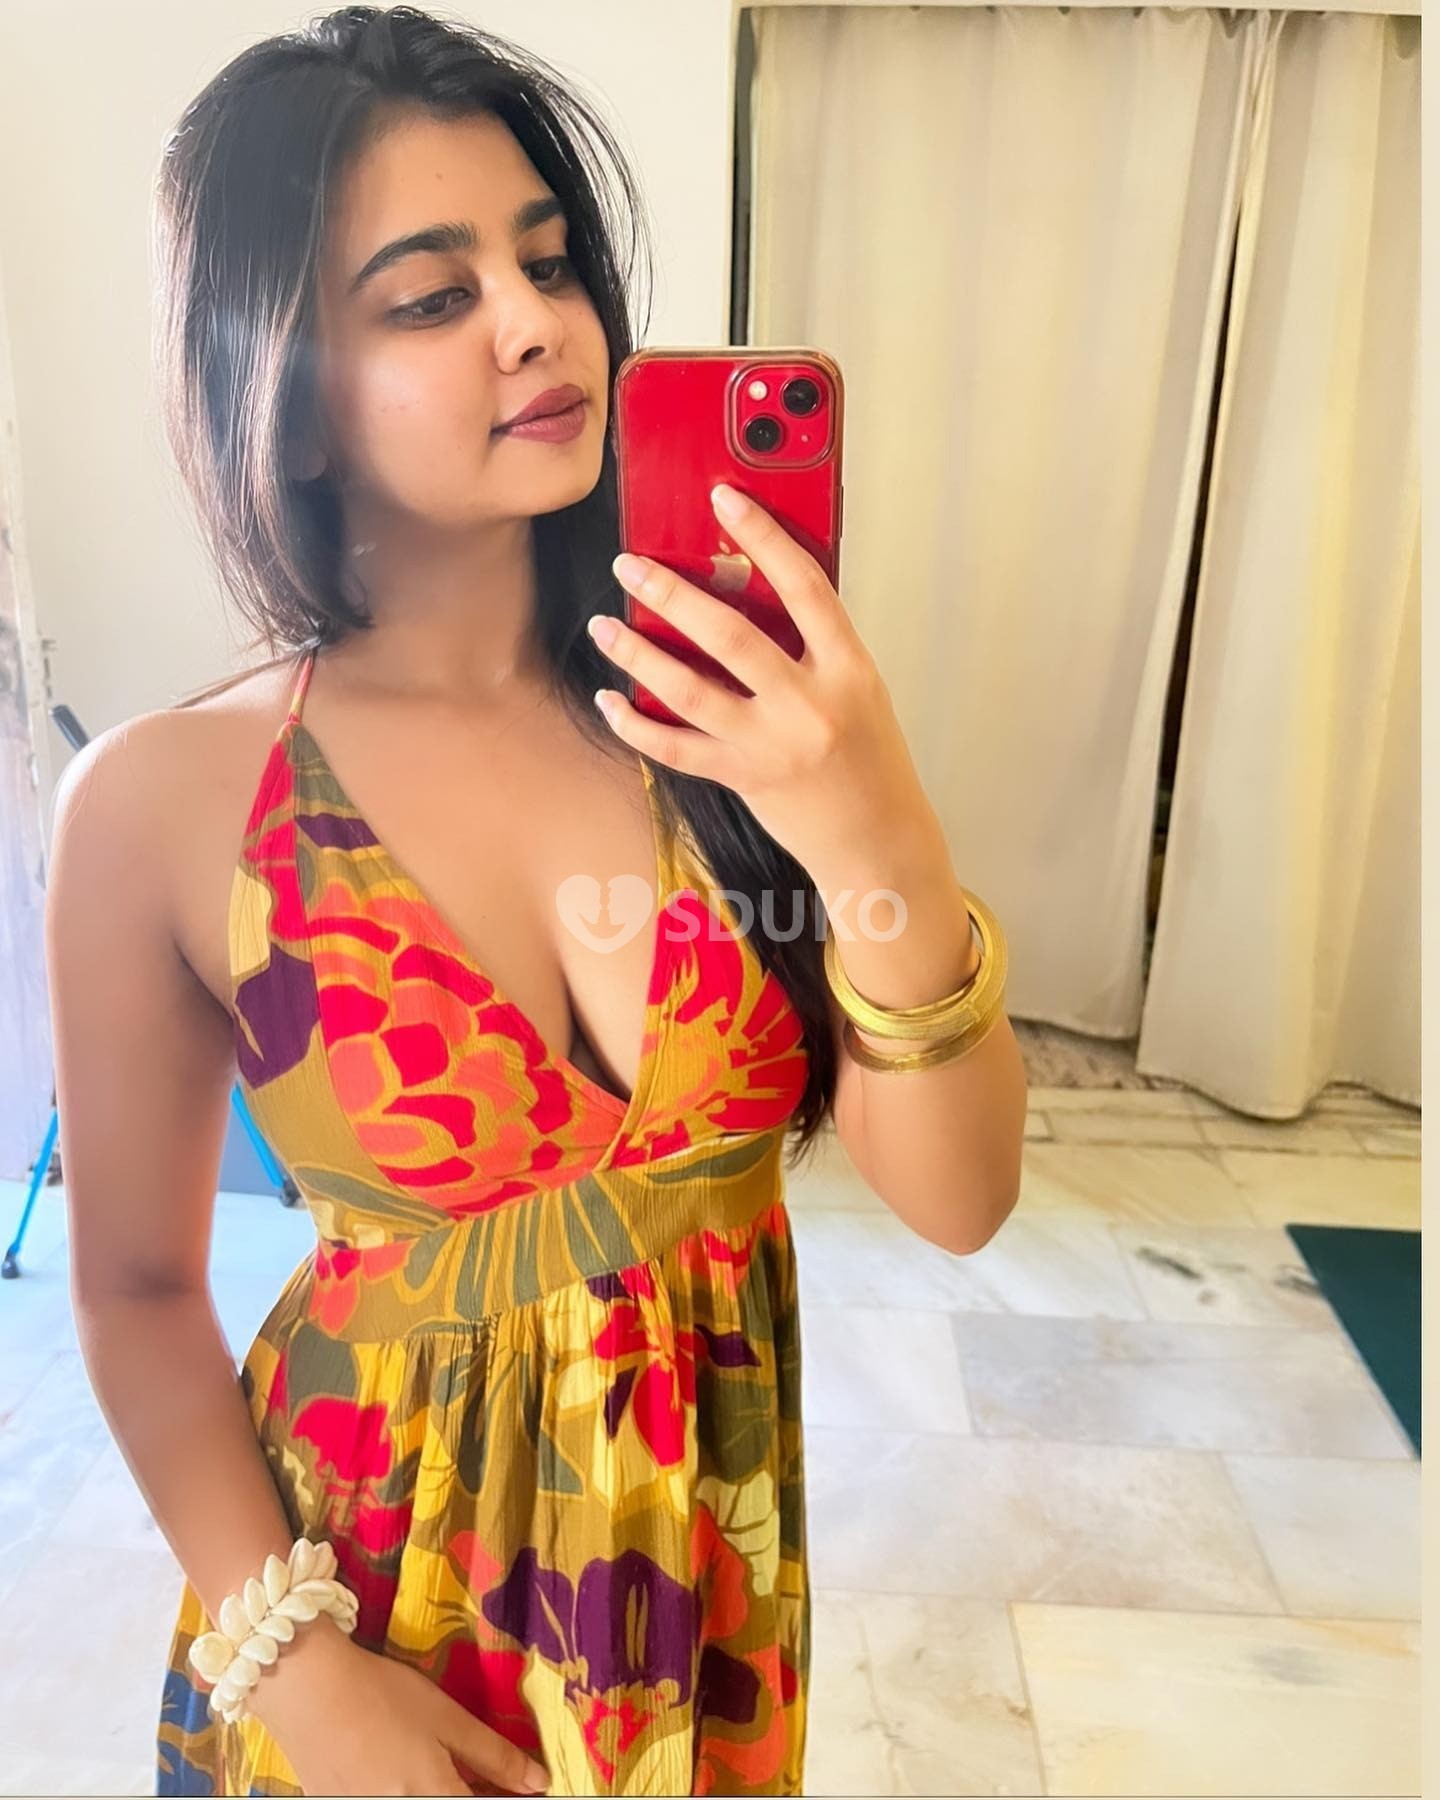 SALEM ❣️ SENJAL█▬█🅞▀█▀ AND GORGEOUS LUXURIOUS CALL GIRLS AND ESCORT SERVICE AVAILABLE